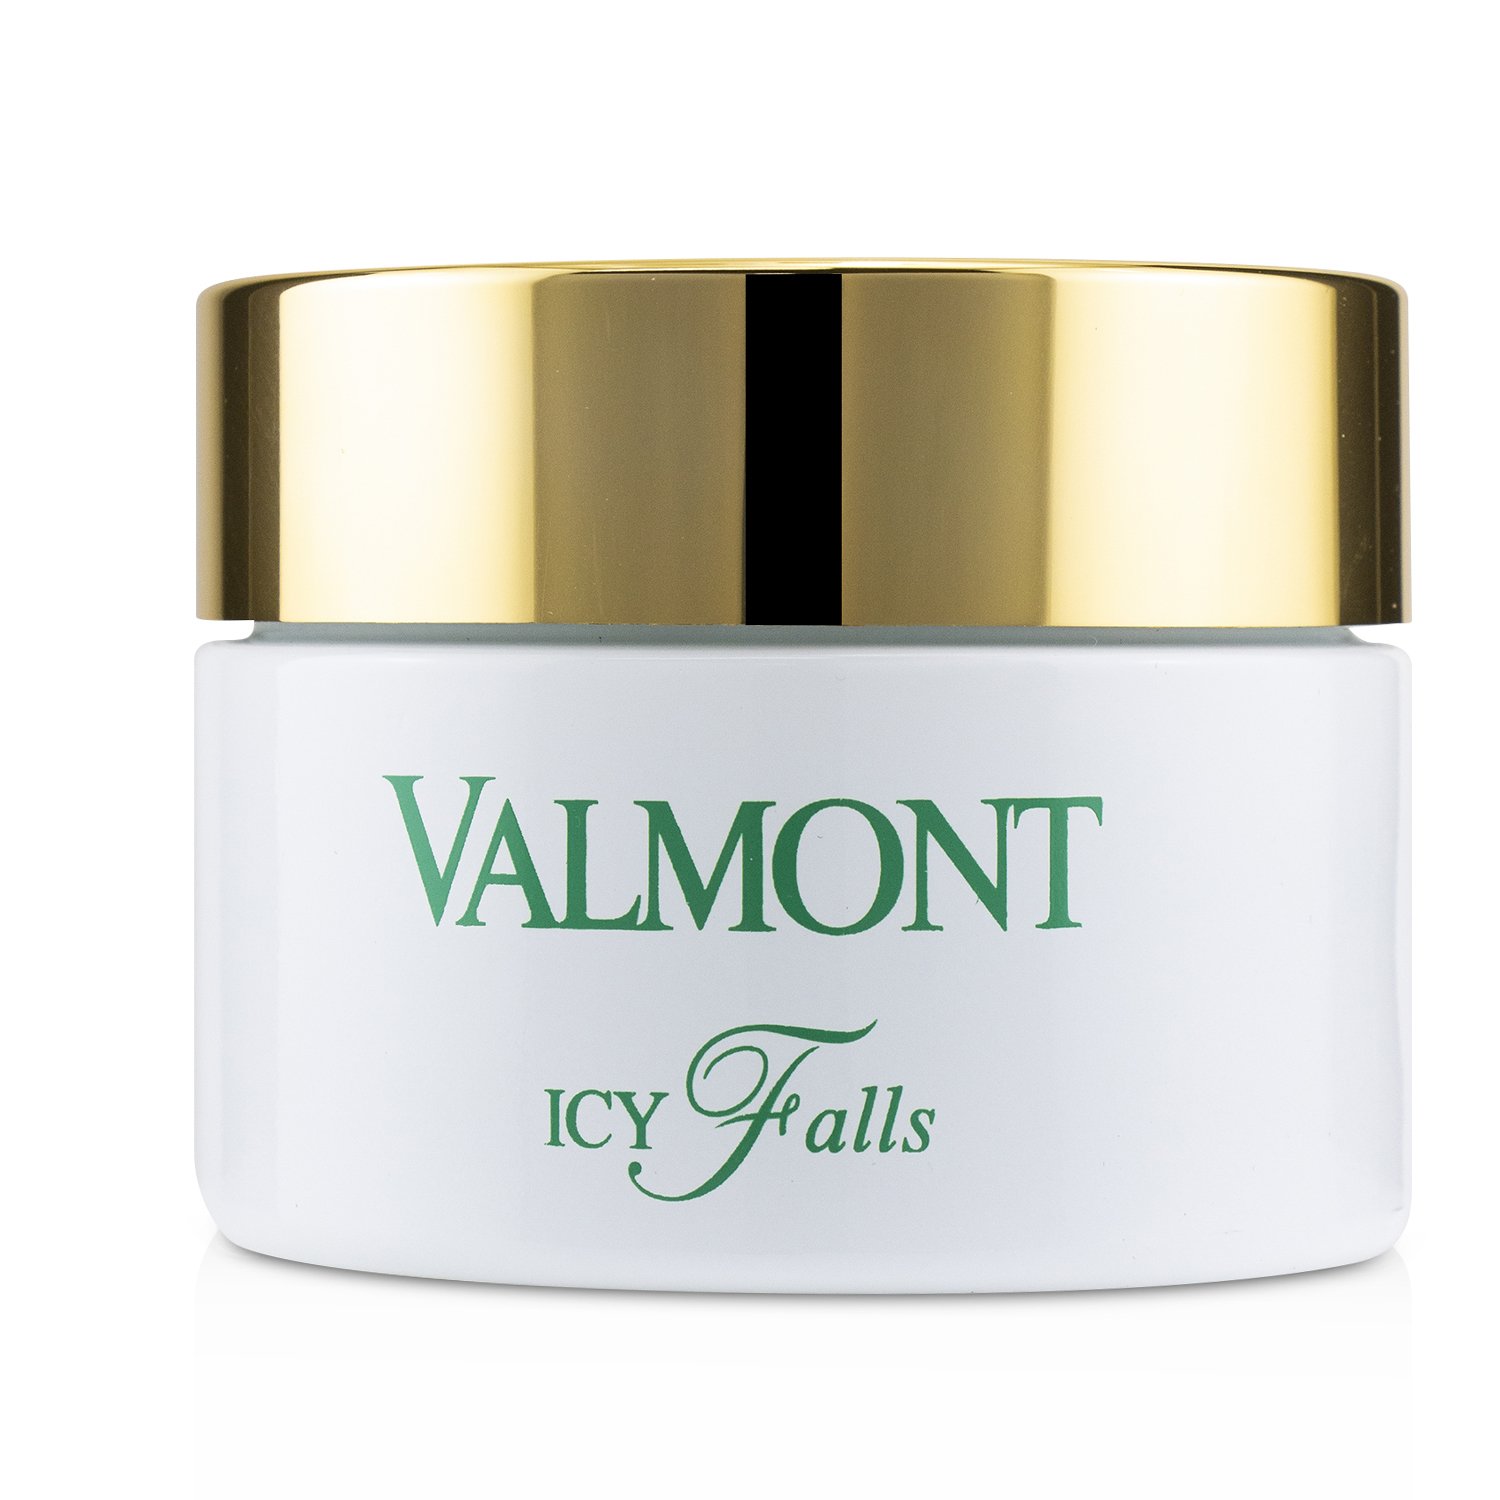 Valmont Purity Icy Falls (Refreshing Makeup Removing Jelly) 200ml/7oz